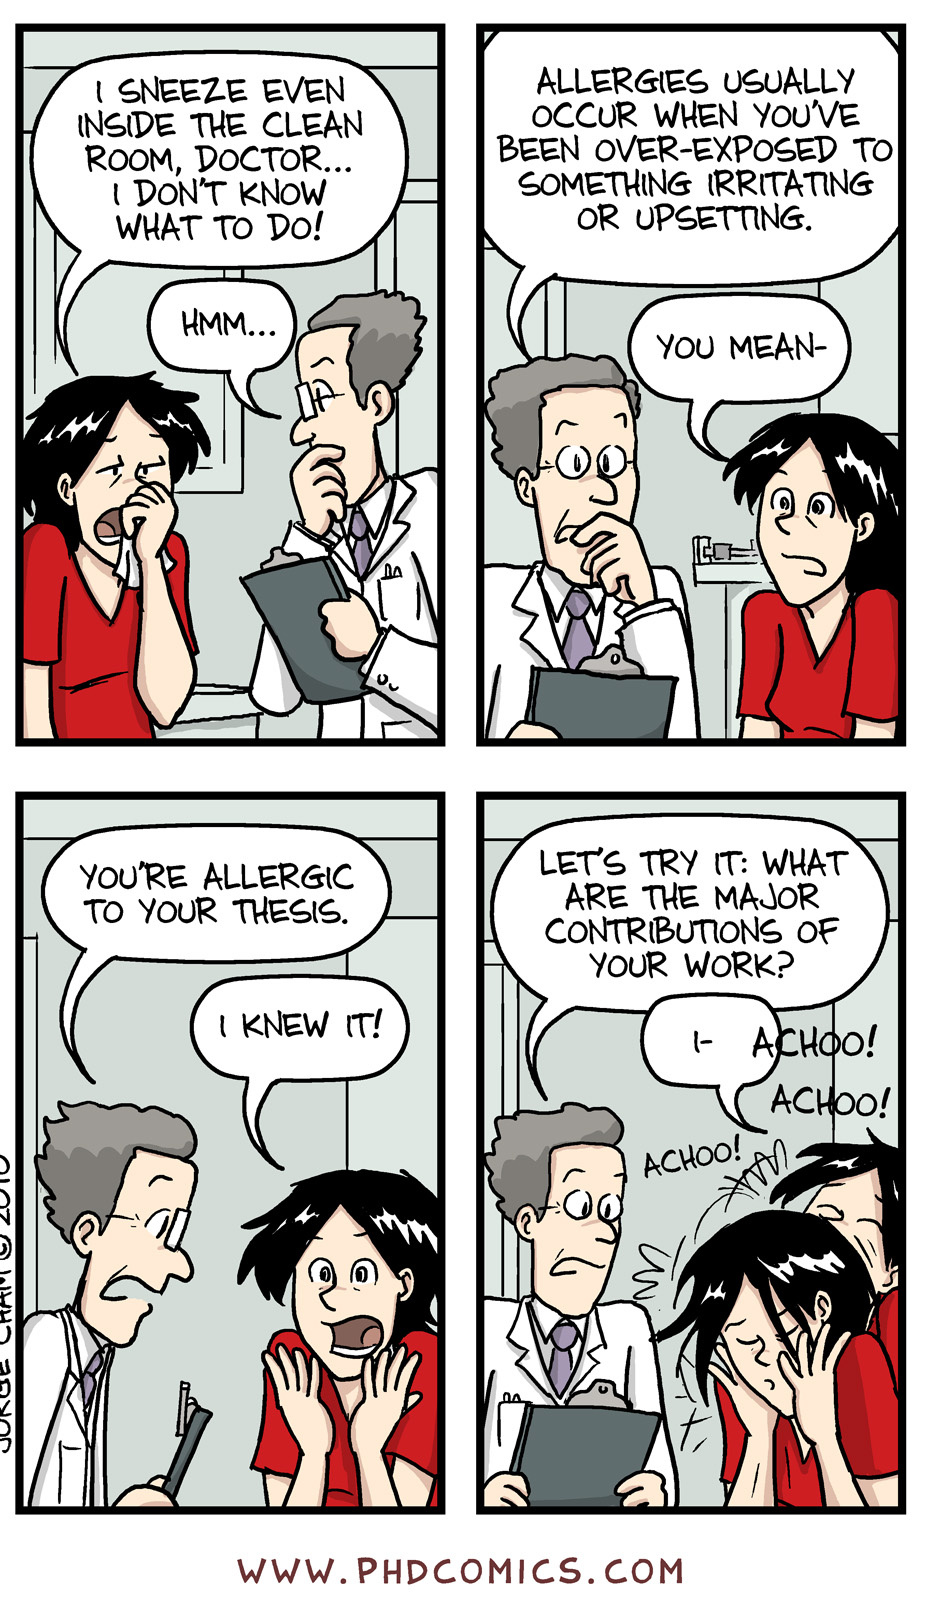 Best of PHD Comics :: A Topical Atopy - image 1